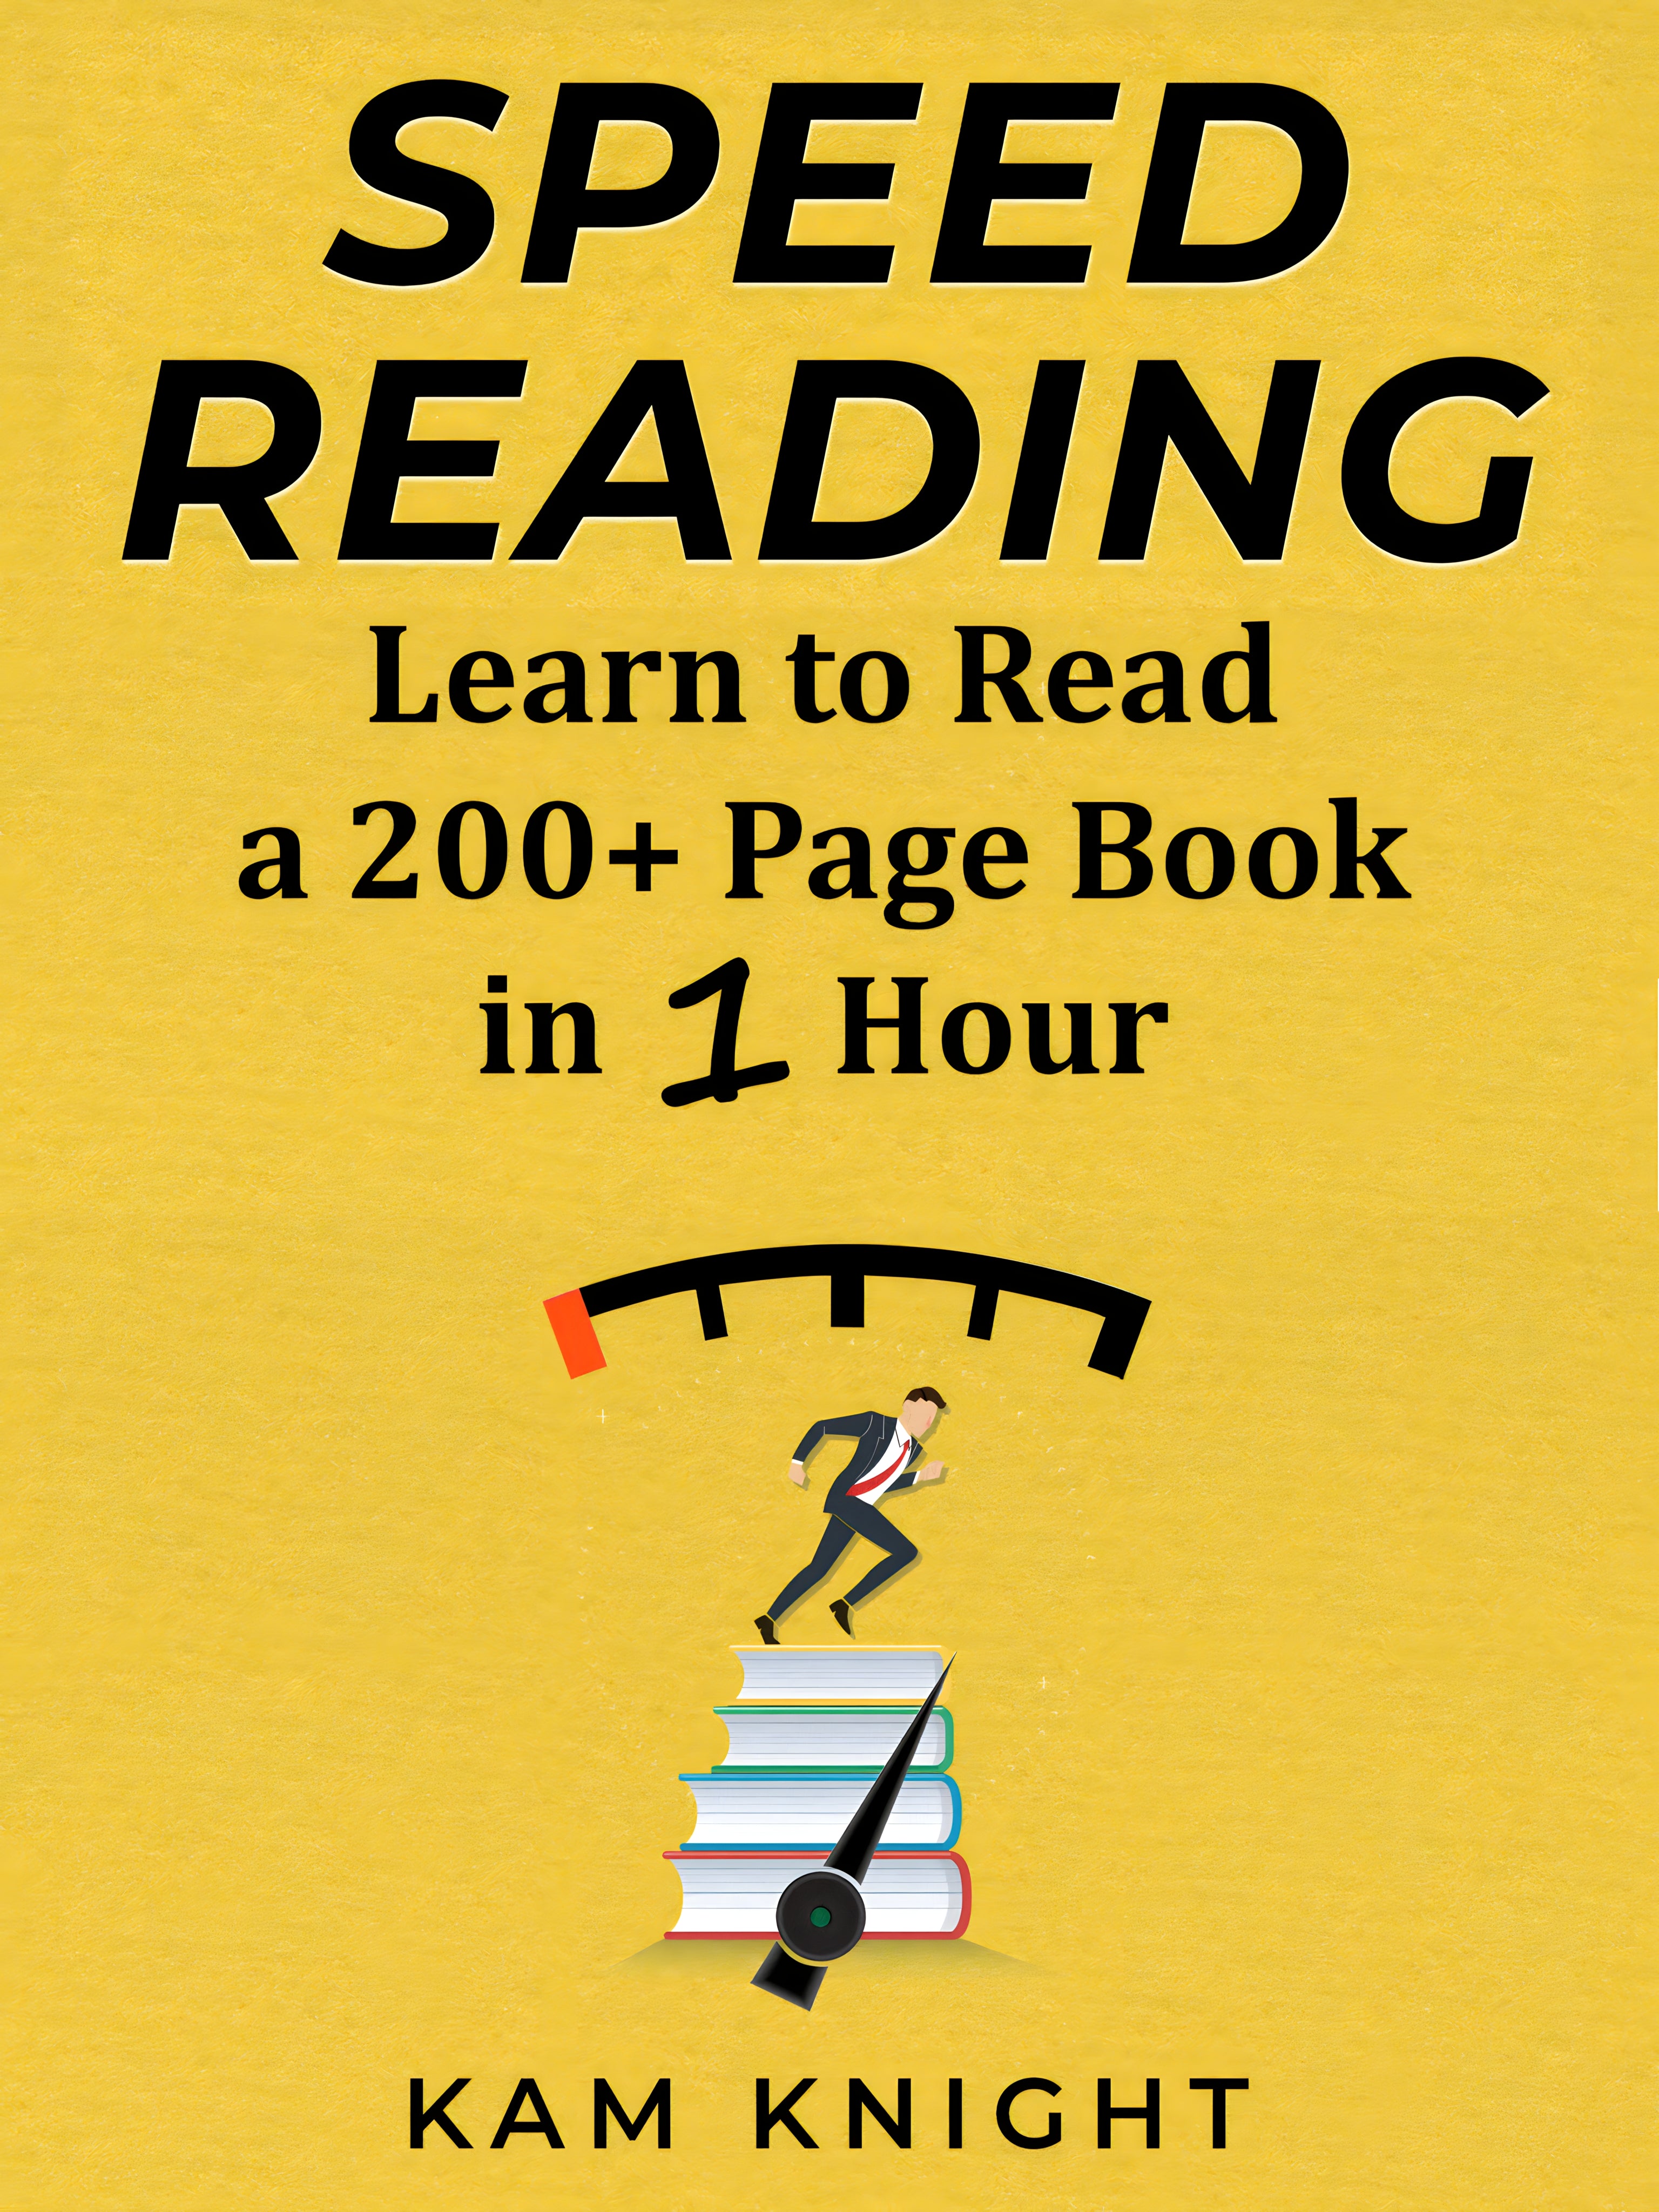 Speed Reading: Learn to Read a 200+ Page Book in 1 Hour - eBook